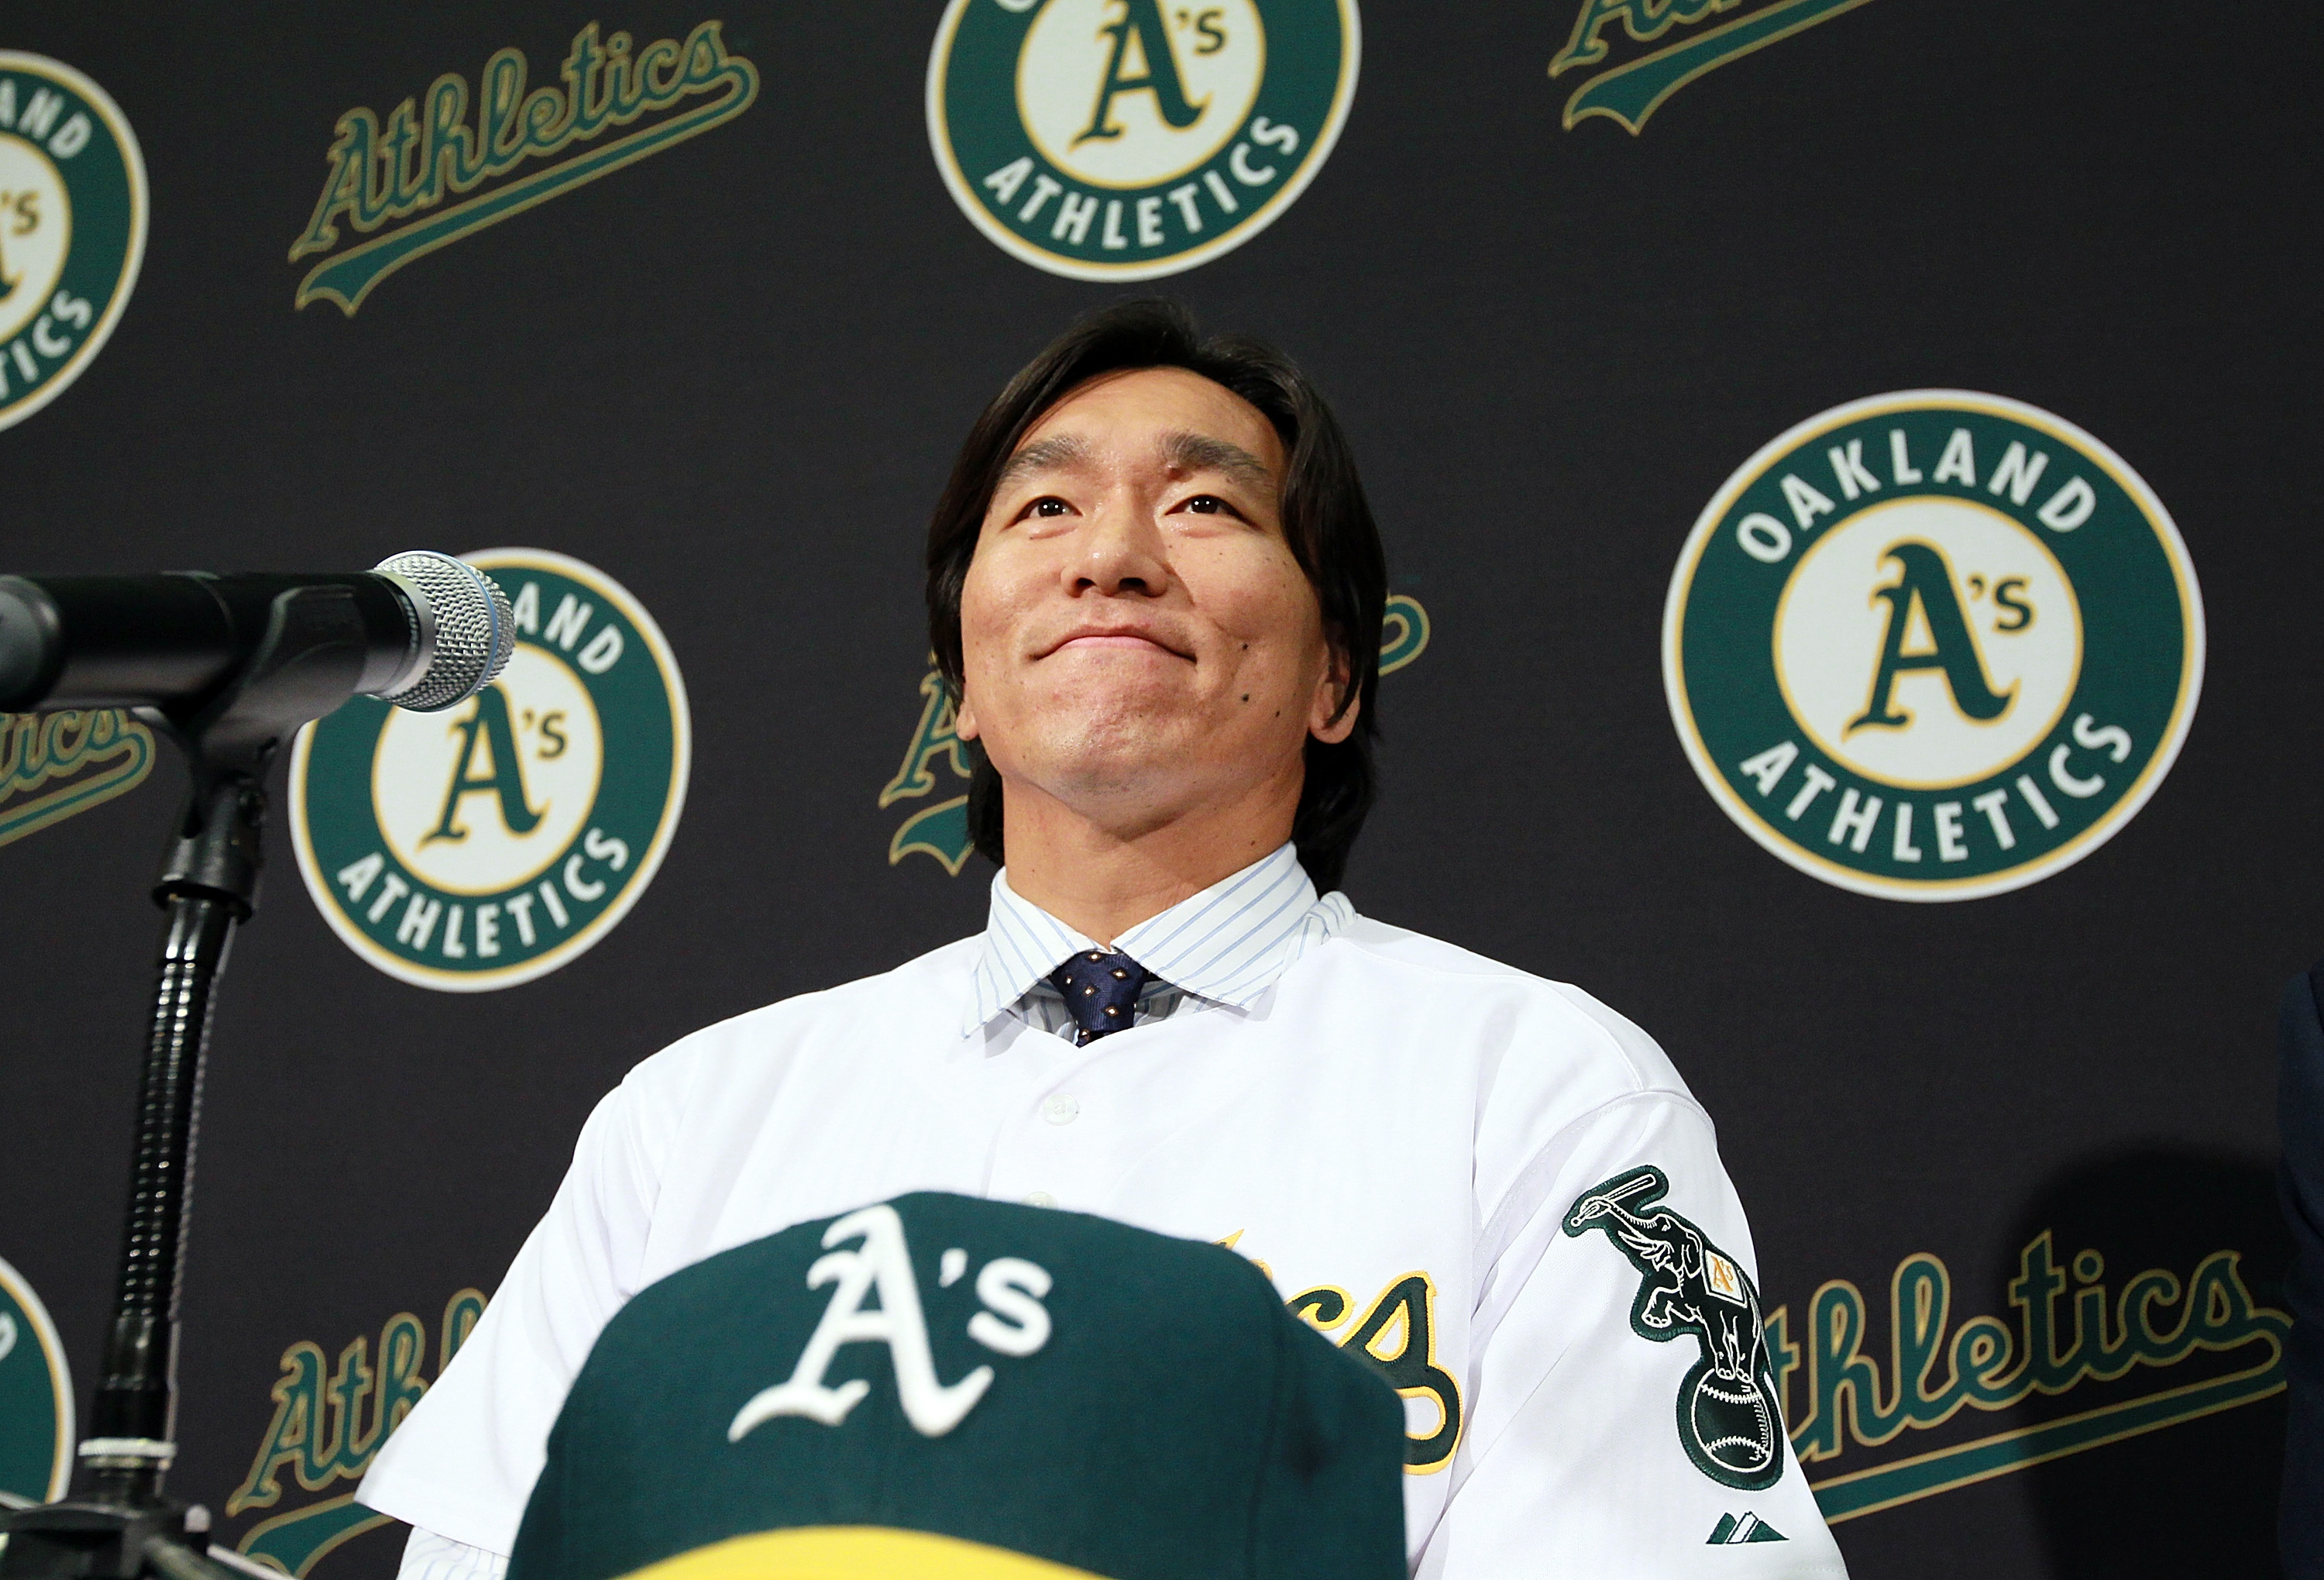 OAKLAND, CA - DECEMBER 14:  Hideki Matsui looks on during a press conference where he was introduced as the newest member of the Oakland Athletics at Oakland-Alameda County Coliseum on December 14, 2010 in Oakland, California.  The Oakland Athletics signe